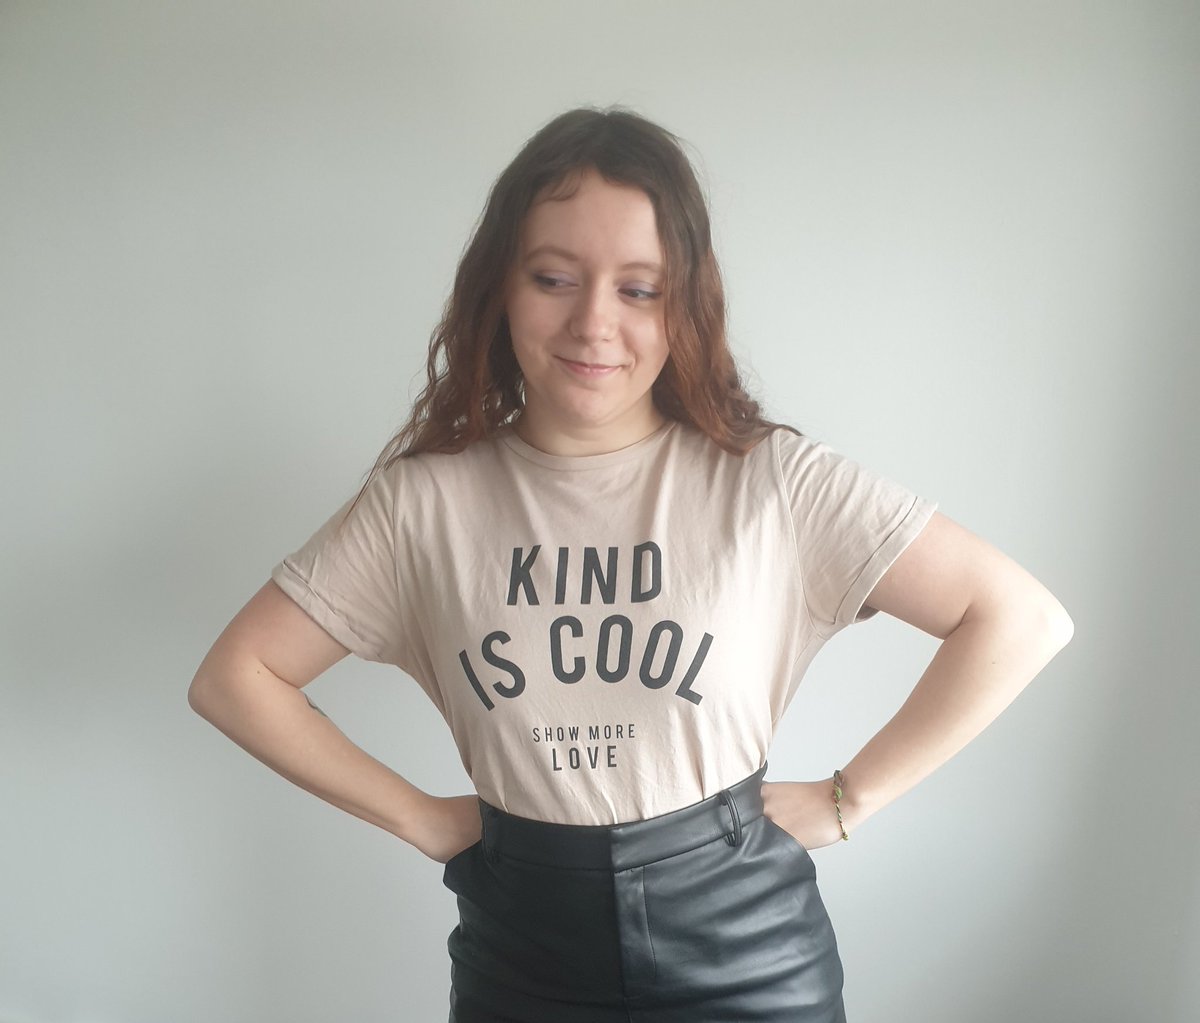 Could 'wearing a t-shirt that conveys a good message' be part of the #21daysofkindness ? #BeKind #KindIsCool #ShowMoreLove ❤❤
@ZakAbel